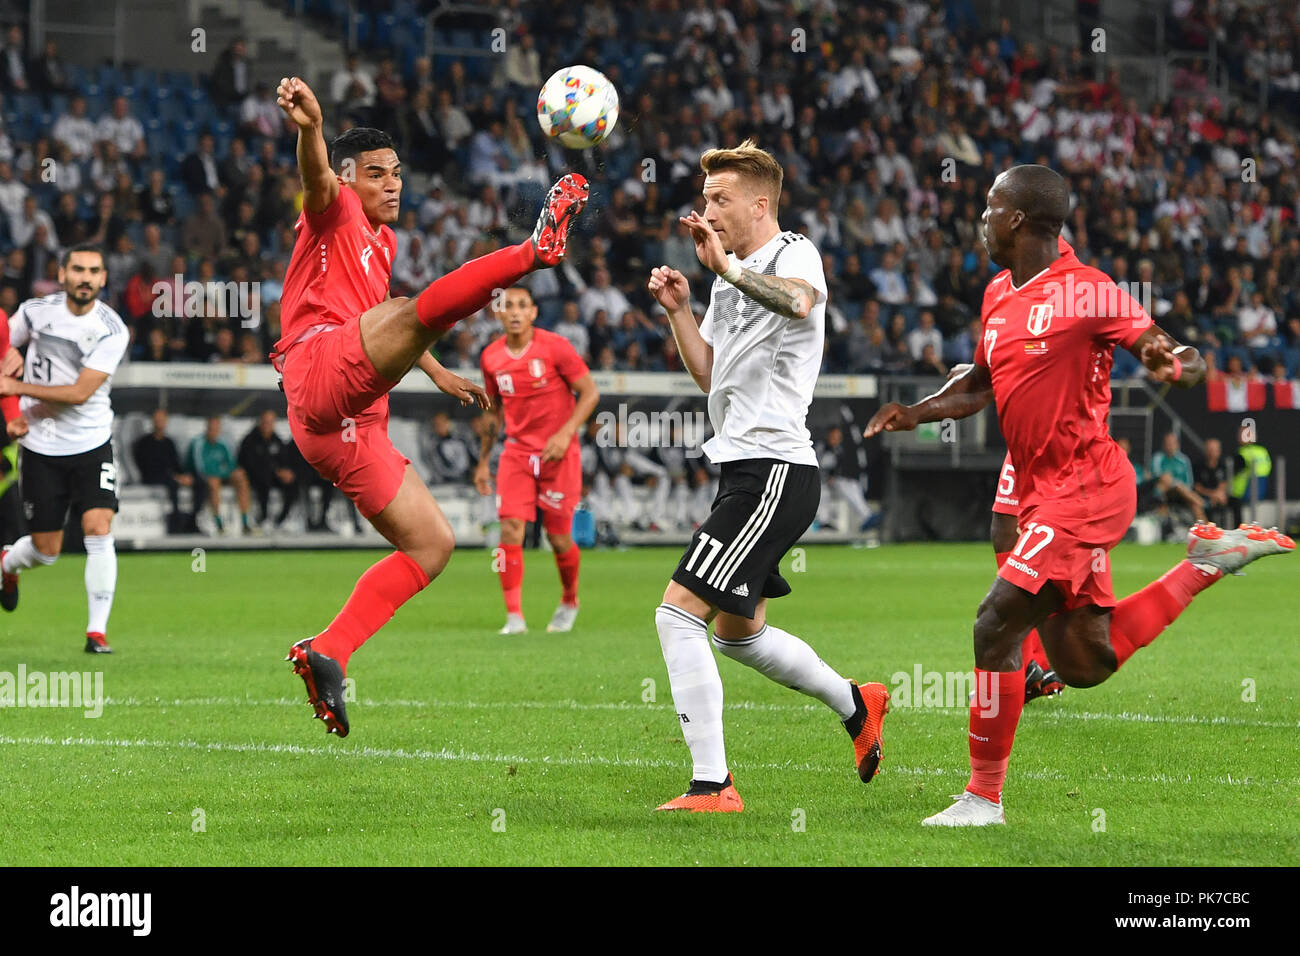 Marco REUS (GER), action, duels versus Anderson SANTAMARIA (PER), re: Luis ADVINCULA (PER). Soccer Laenderspiel, Germany (GER) -Peru (PER) 2-1 on 09/09/2018 in Sinsheim/Wirsol Rhein-Neckar-Arena. DFB REGULATIONS PROHIBIT ANY USE OF PHOTOGRAPH AS IMAGE SEQUENCES AND/OR QUASI VIDEO. | usage worldwide Stock Photo